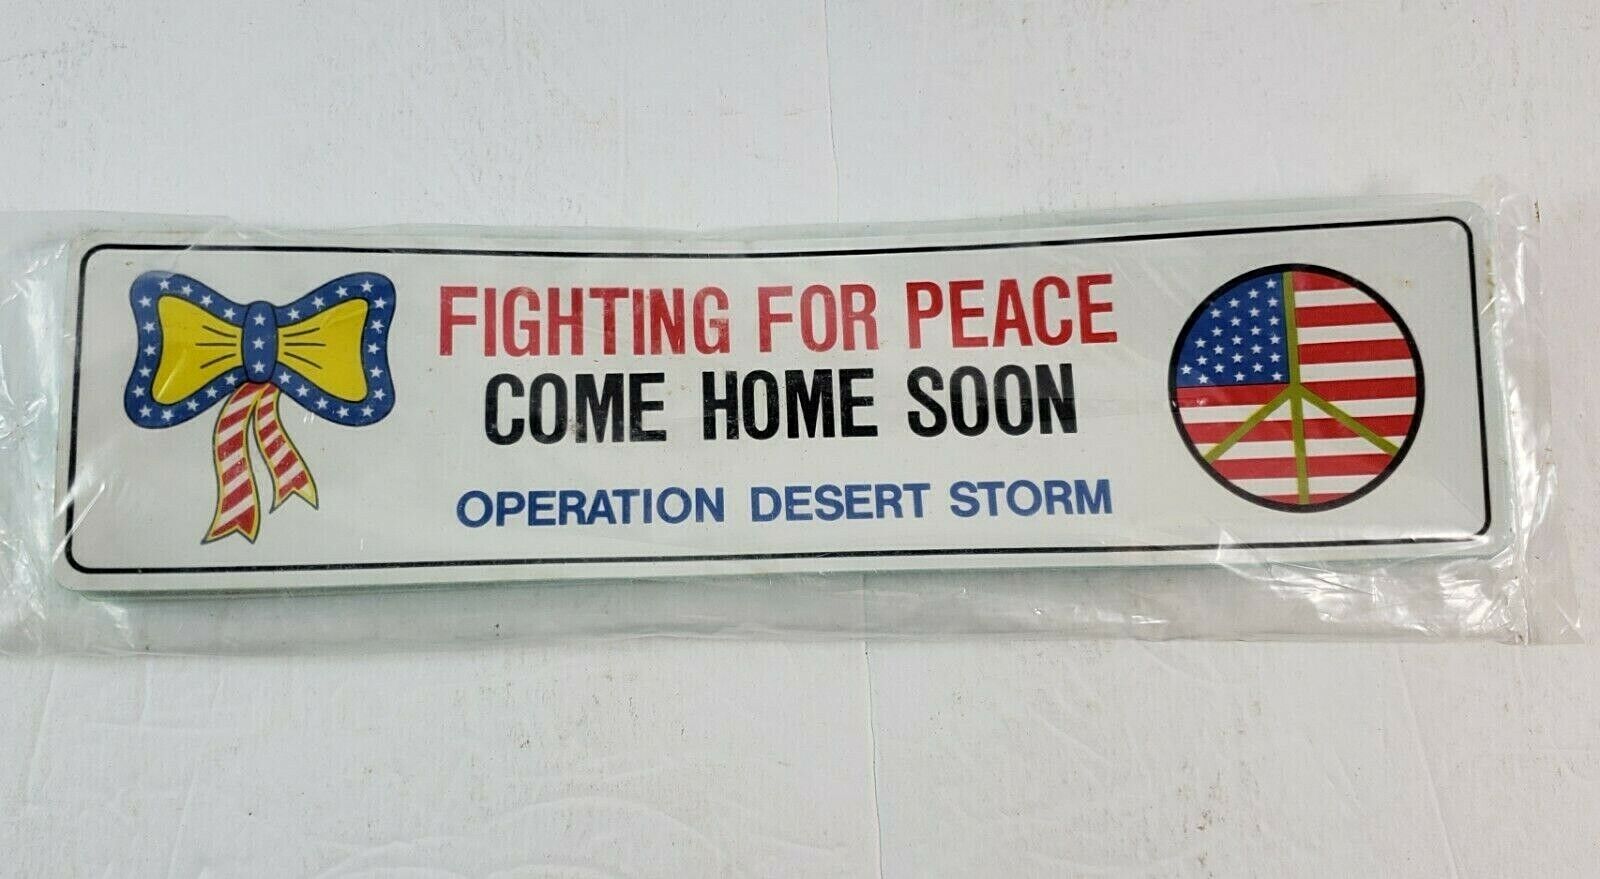 Lot 20+ 1990 Operation Desert Storm Fighting for Peace Bumper Stickers 12\